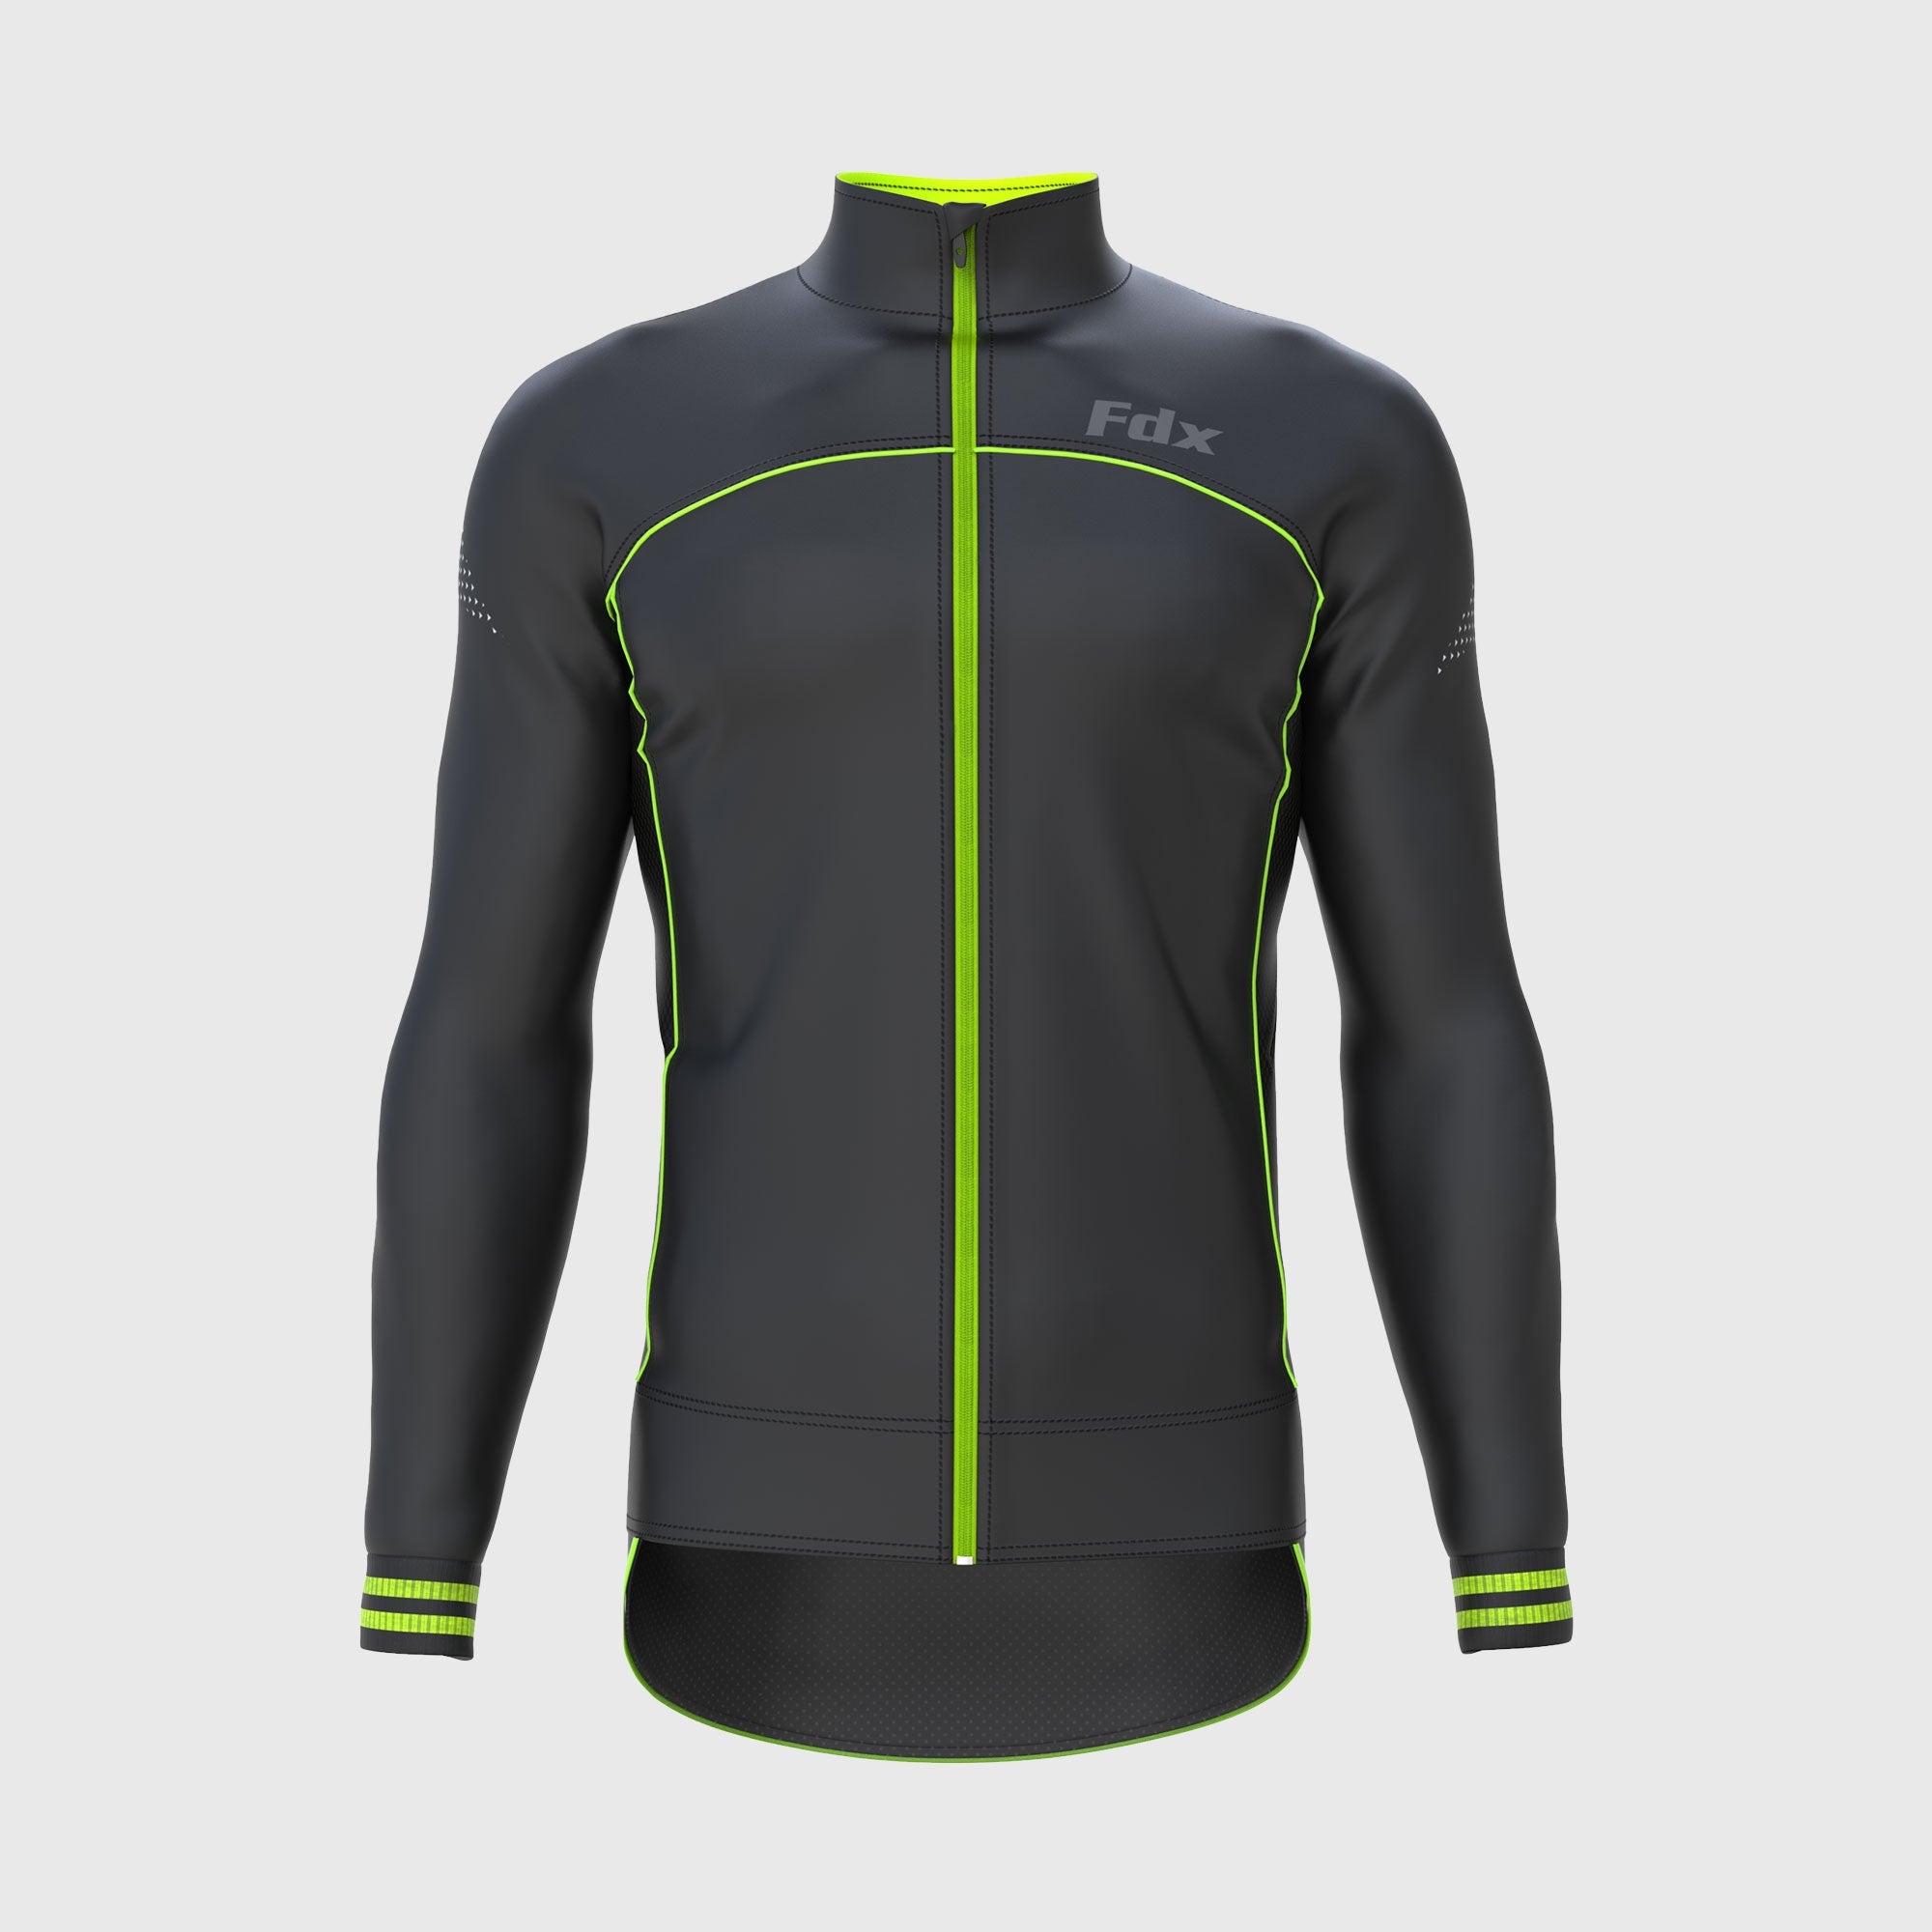 Fdx Apollux Green Men's Windproof Cycling Jacket